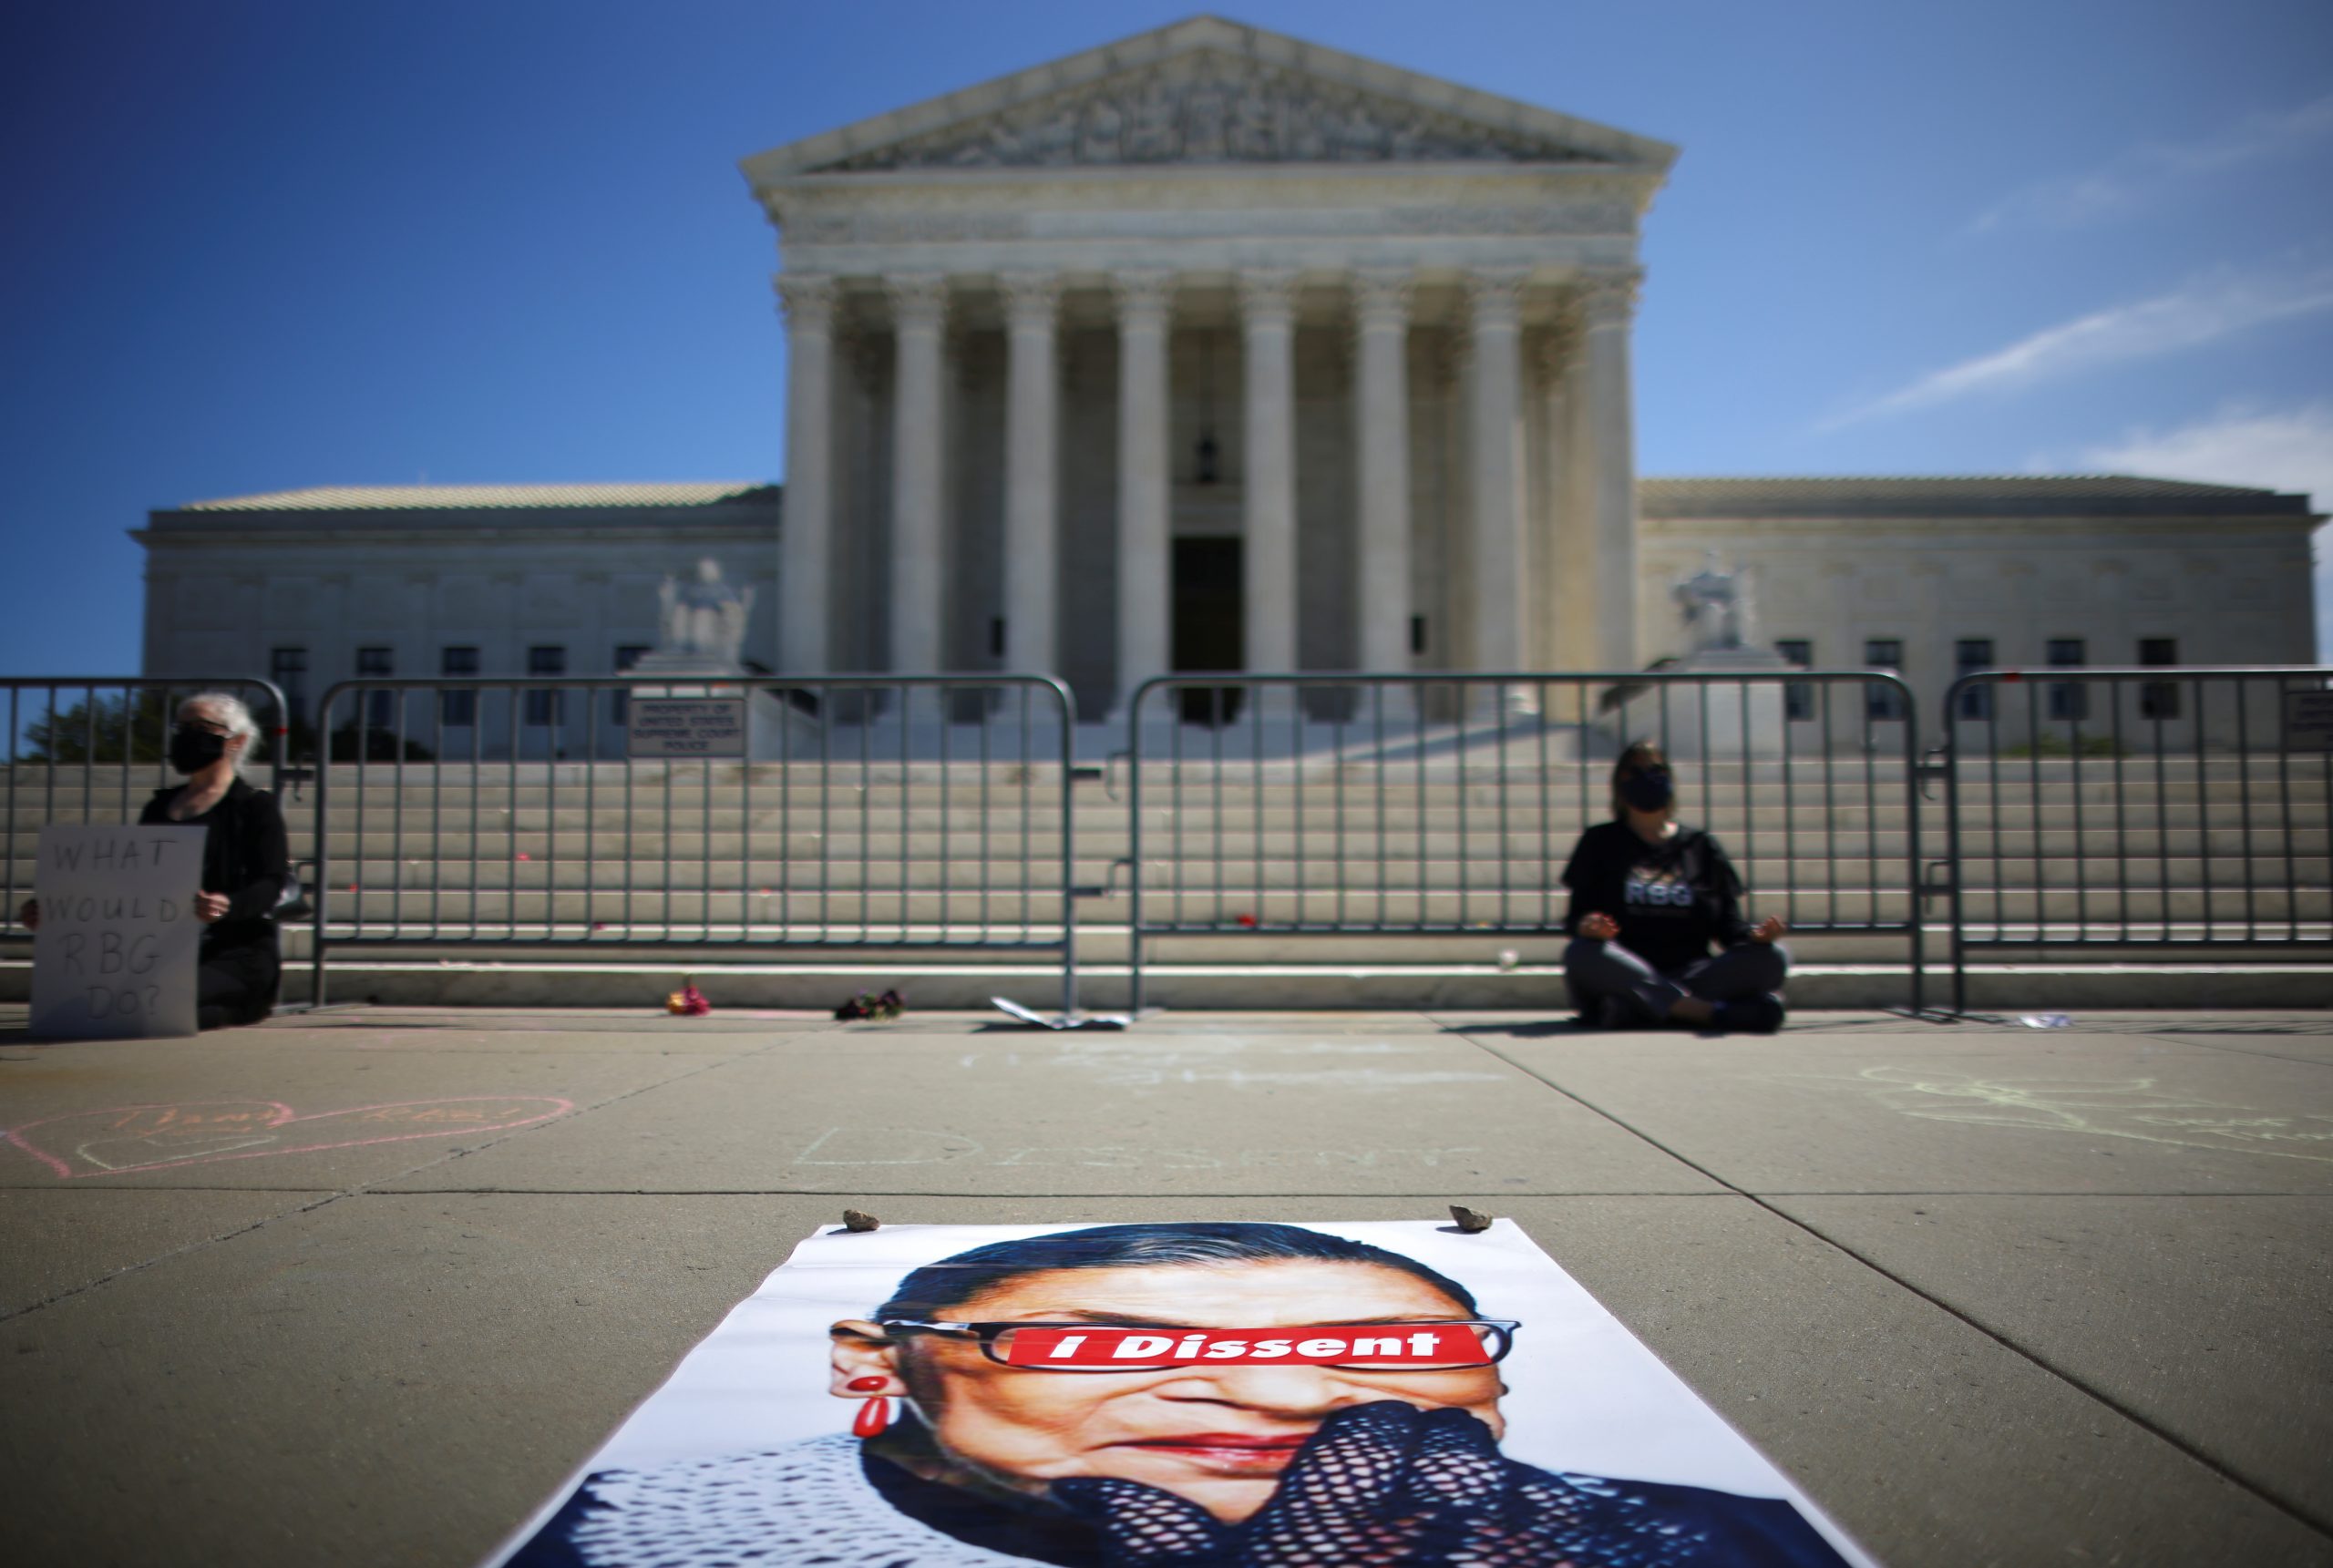 People gather in front of the U.S. Supreme Court following the death of U.S. Supreme Court Justice Ruth Bader Ginsburg, in Washington